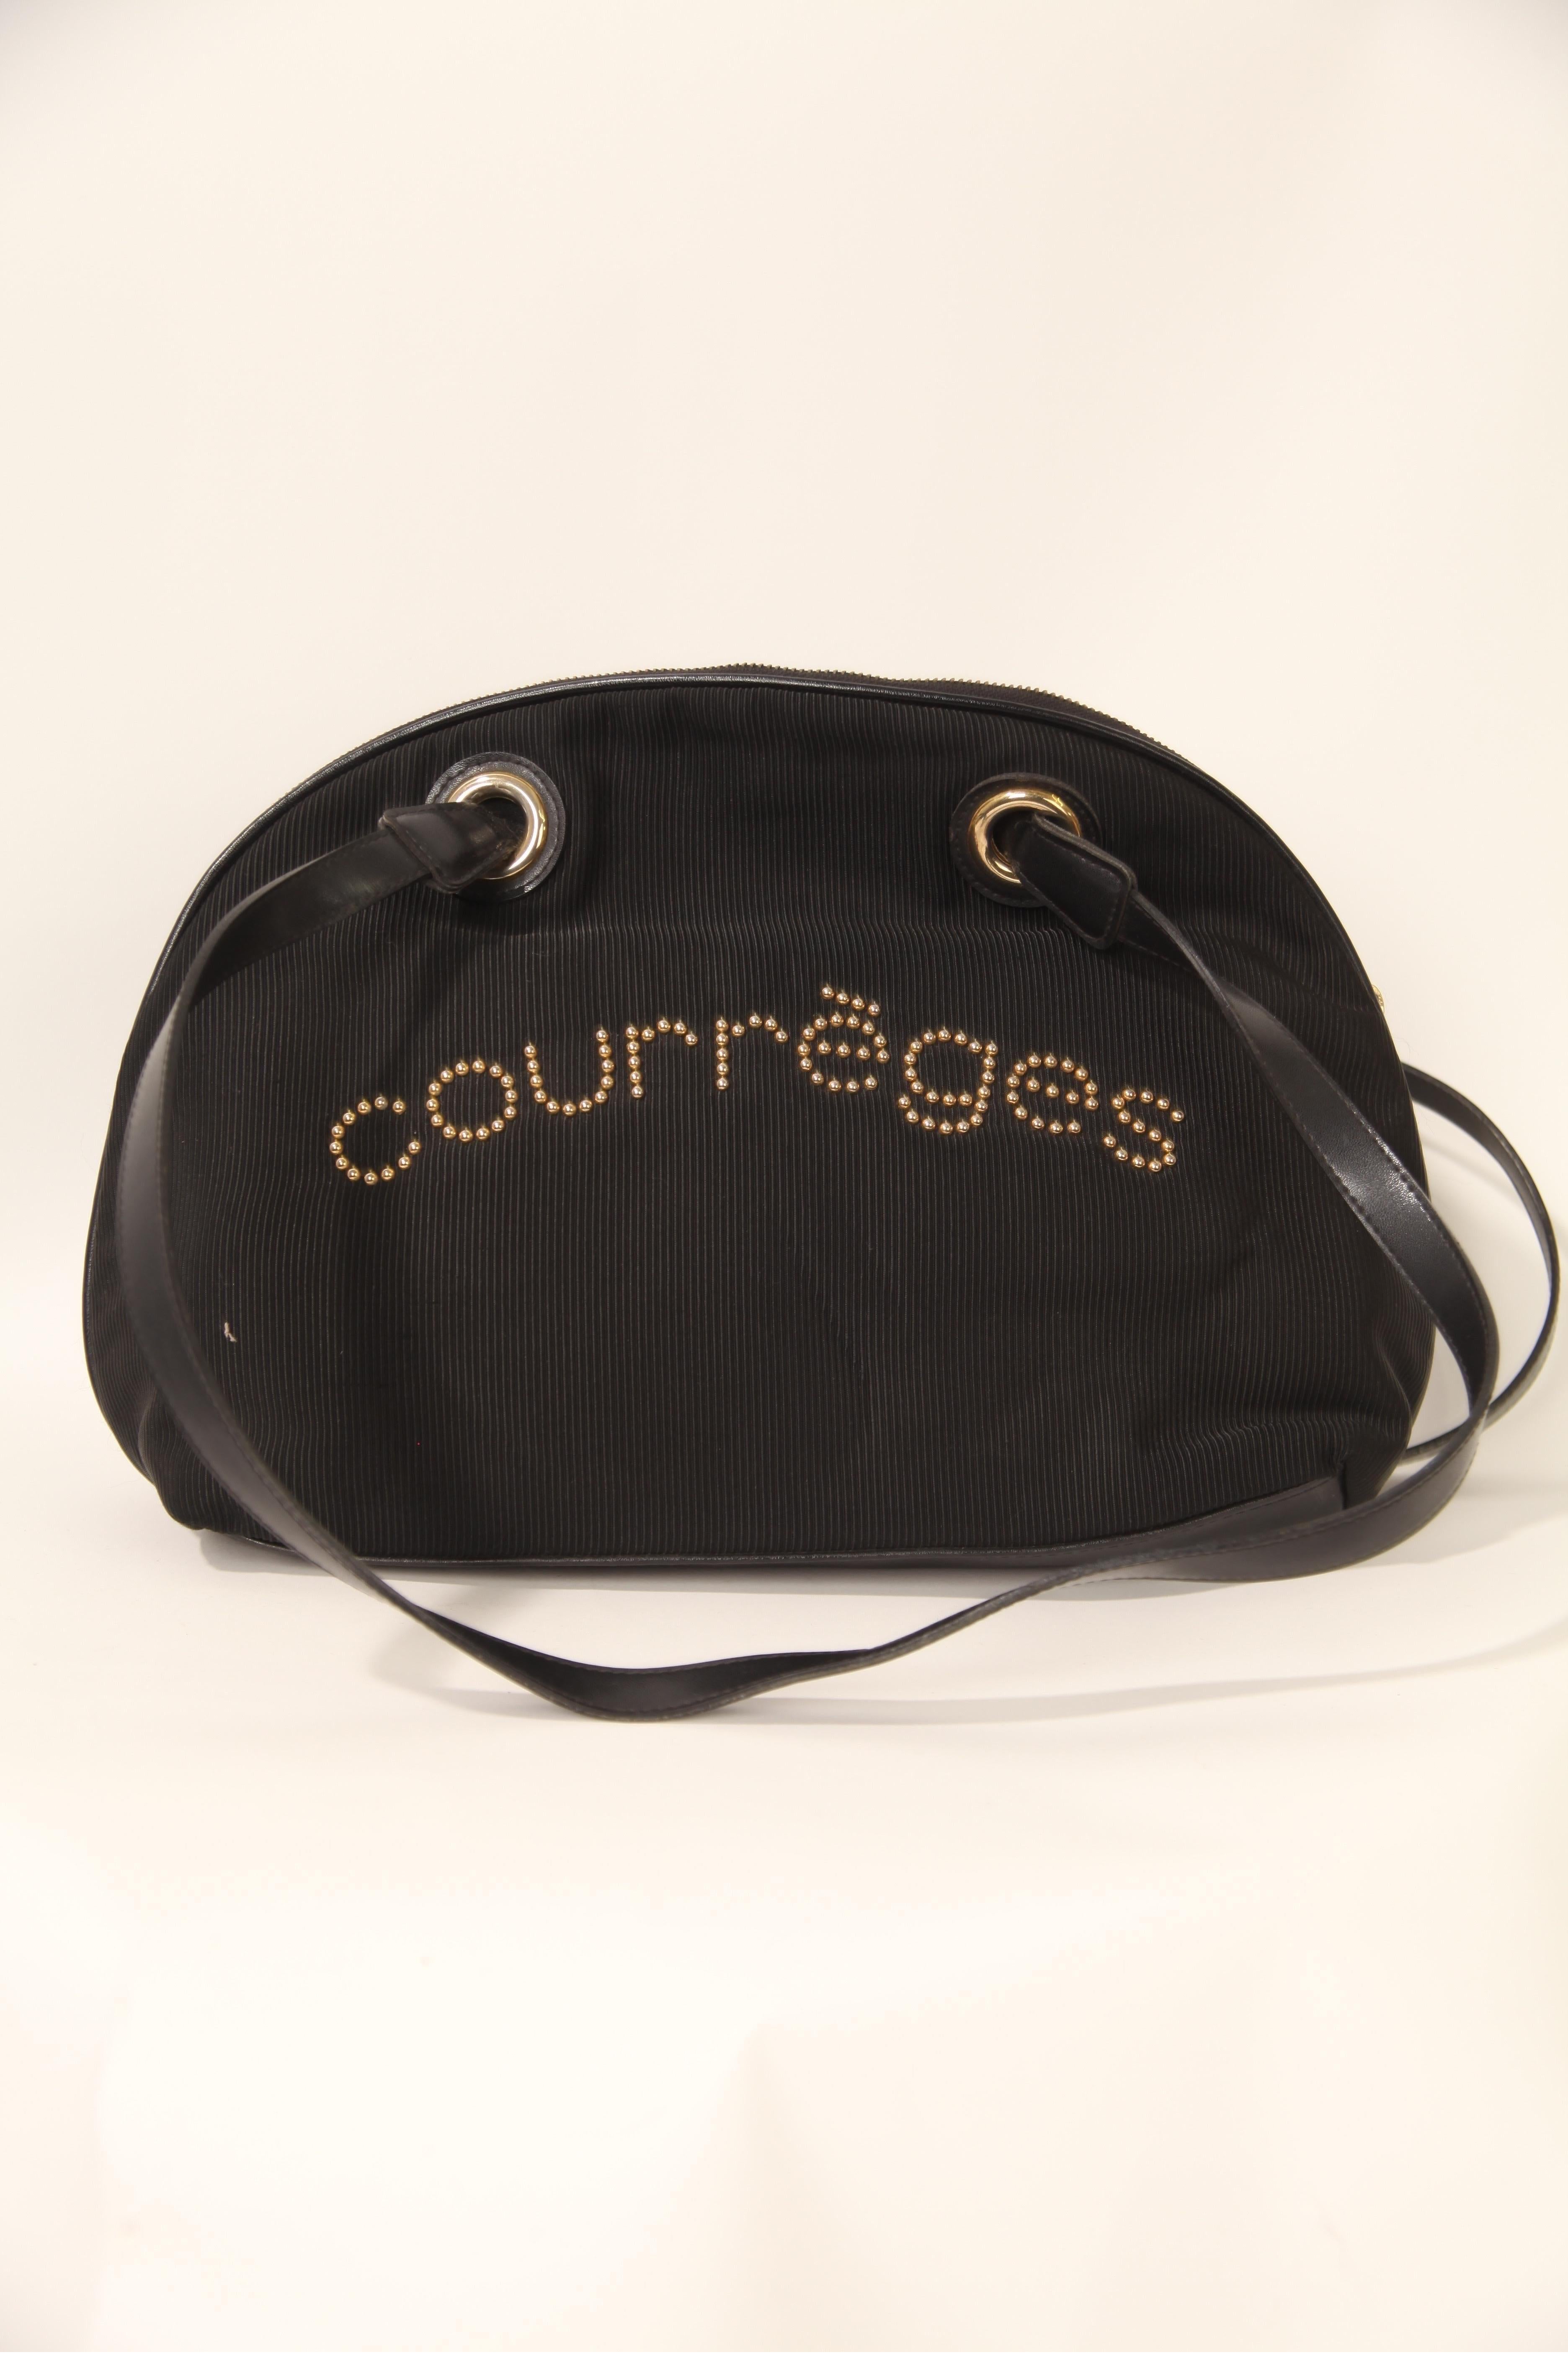 Courrèges, a French fashion house founded by André Courrèges, was known for its futuristic and avant-garde designs in the 1960s and 1970s This Demi Lune bag by Courrèges is a classic design from the fashion house. It's a semi-circular or half-moon